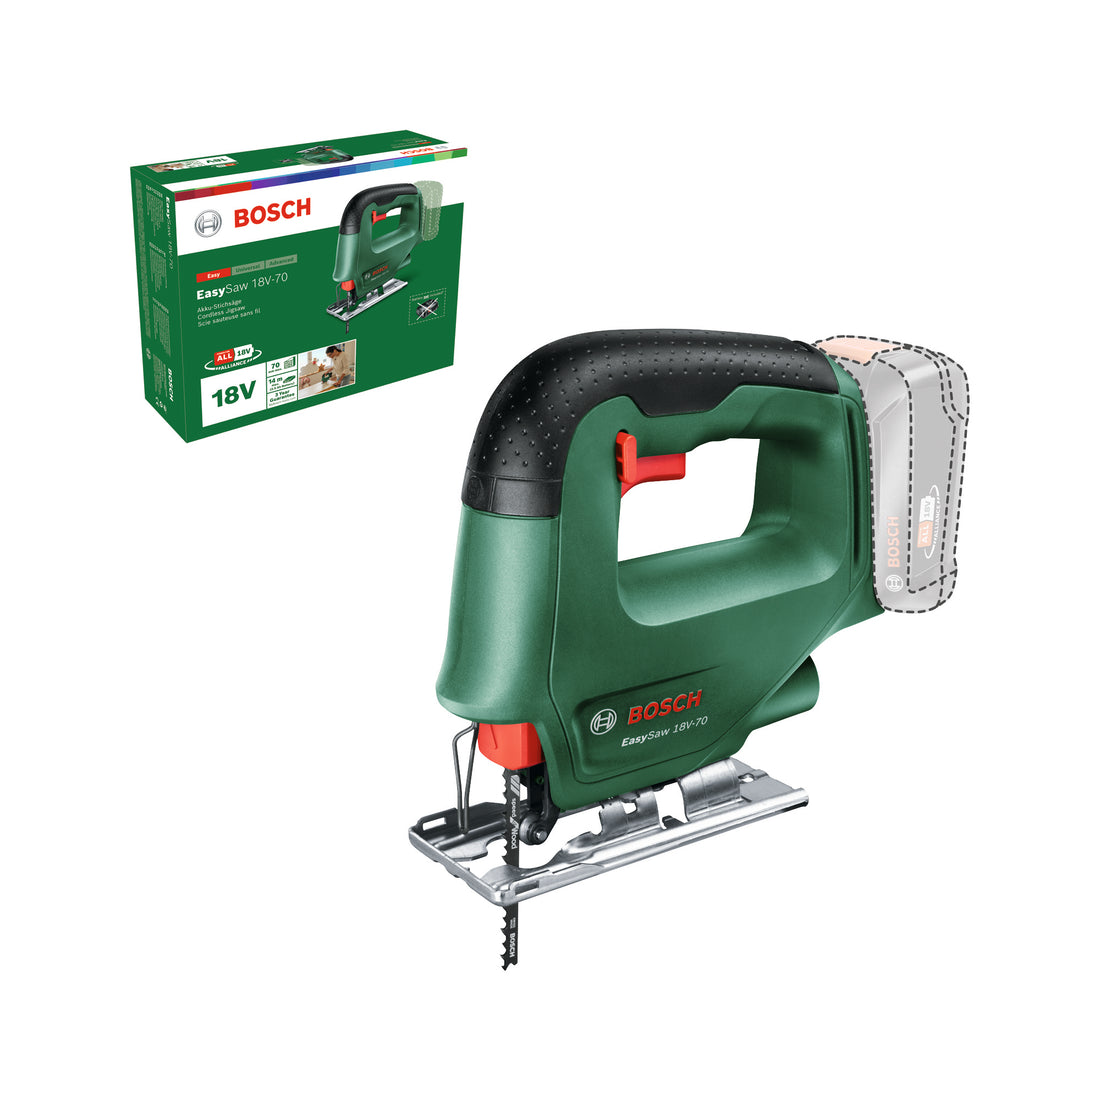 BOSCH EASY SAW 18V-70 JIGSAW, WITHOUT BATTERY AND CHARGER